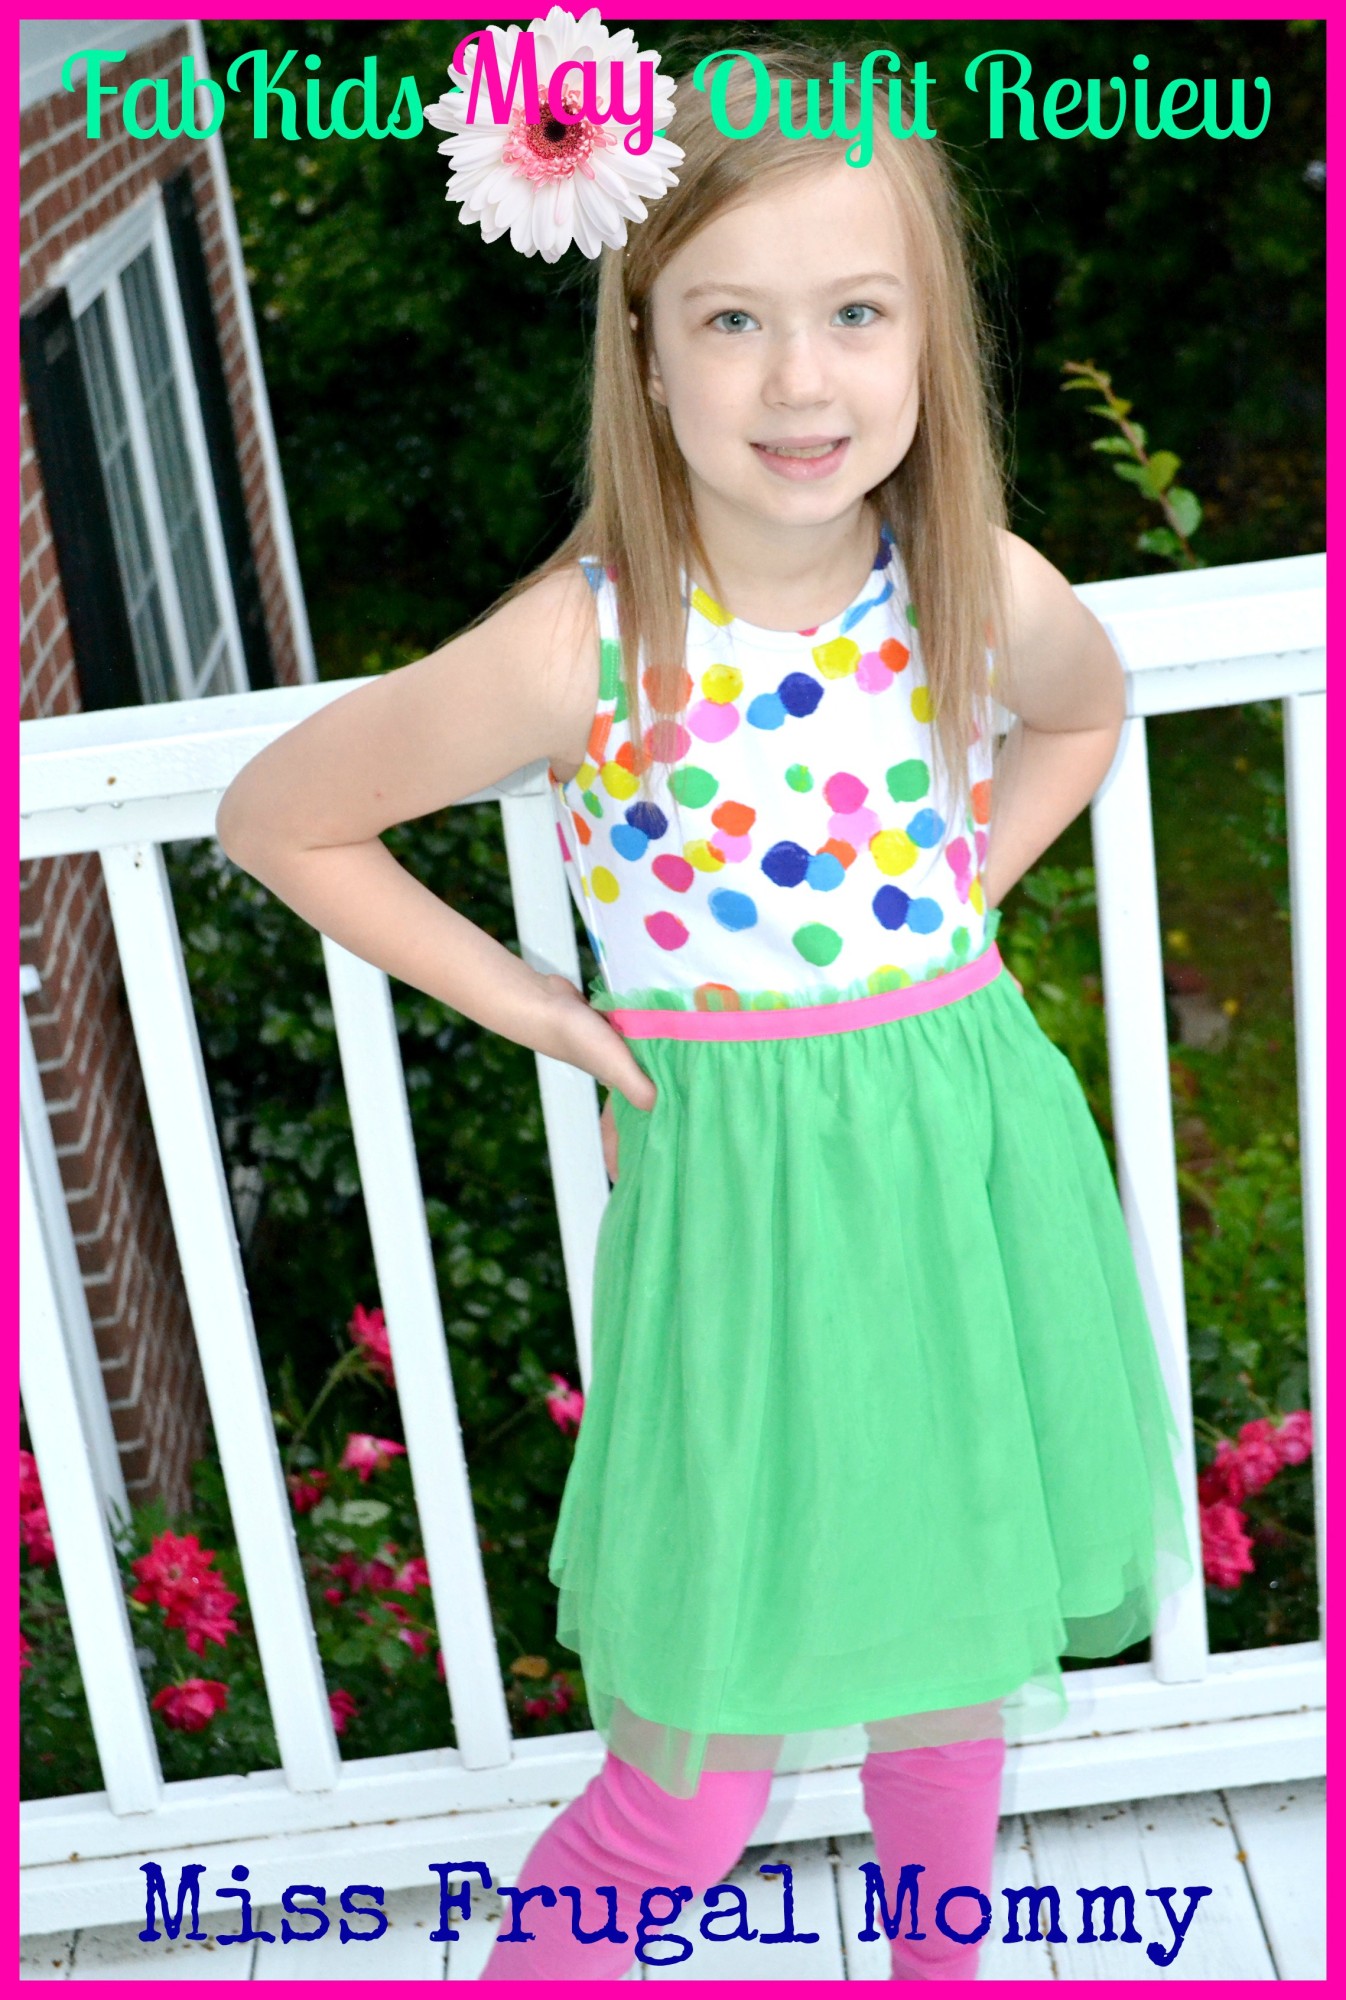 FabKids May Outfit Review